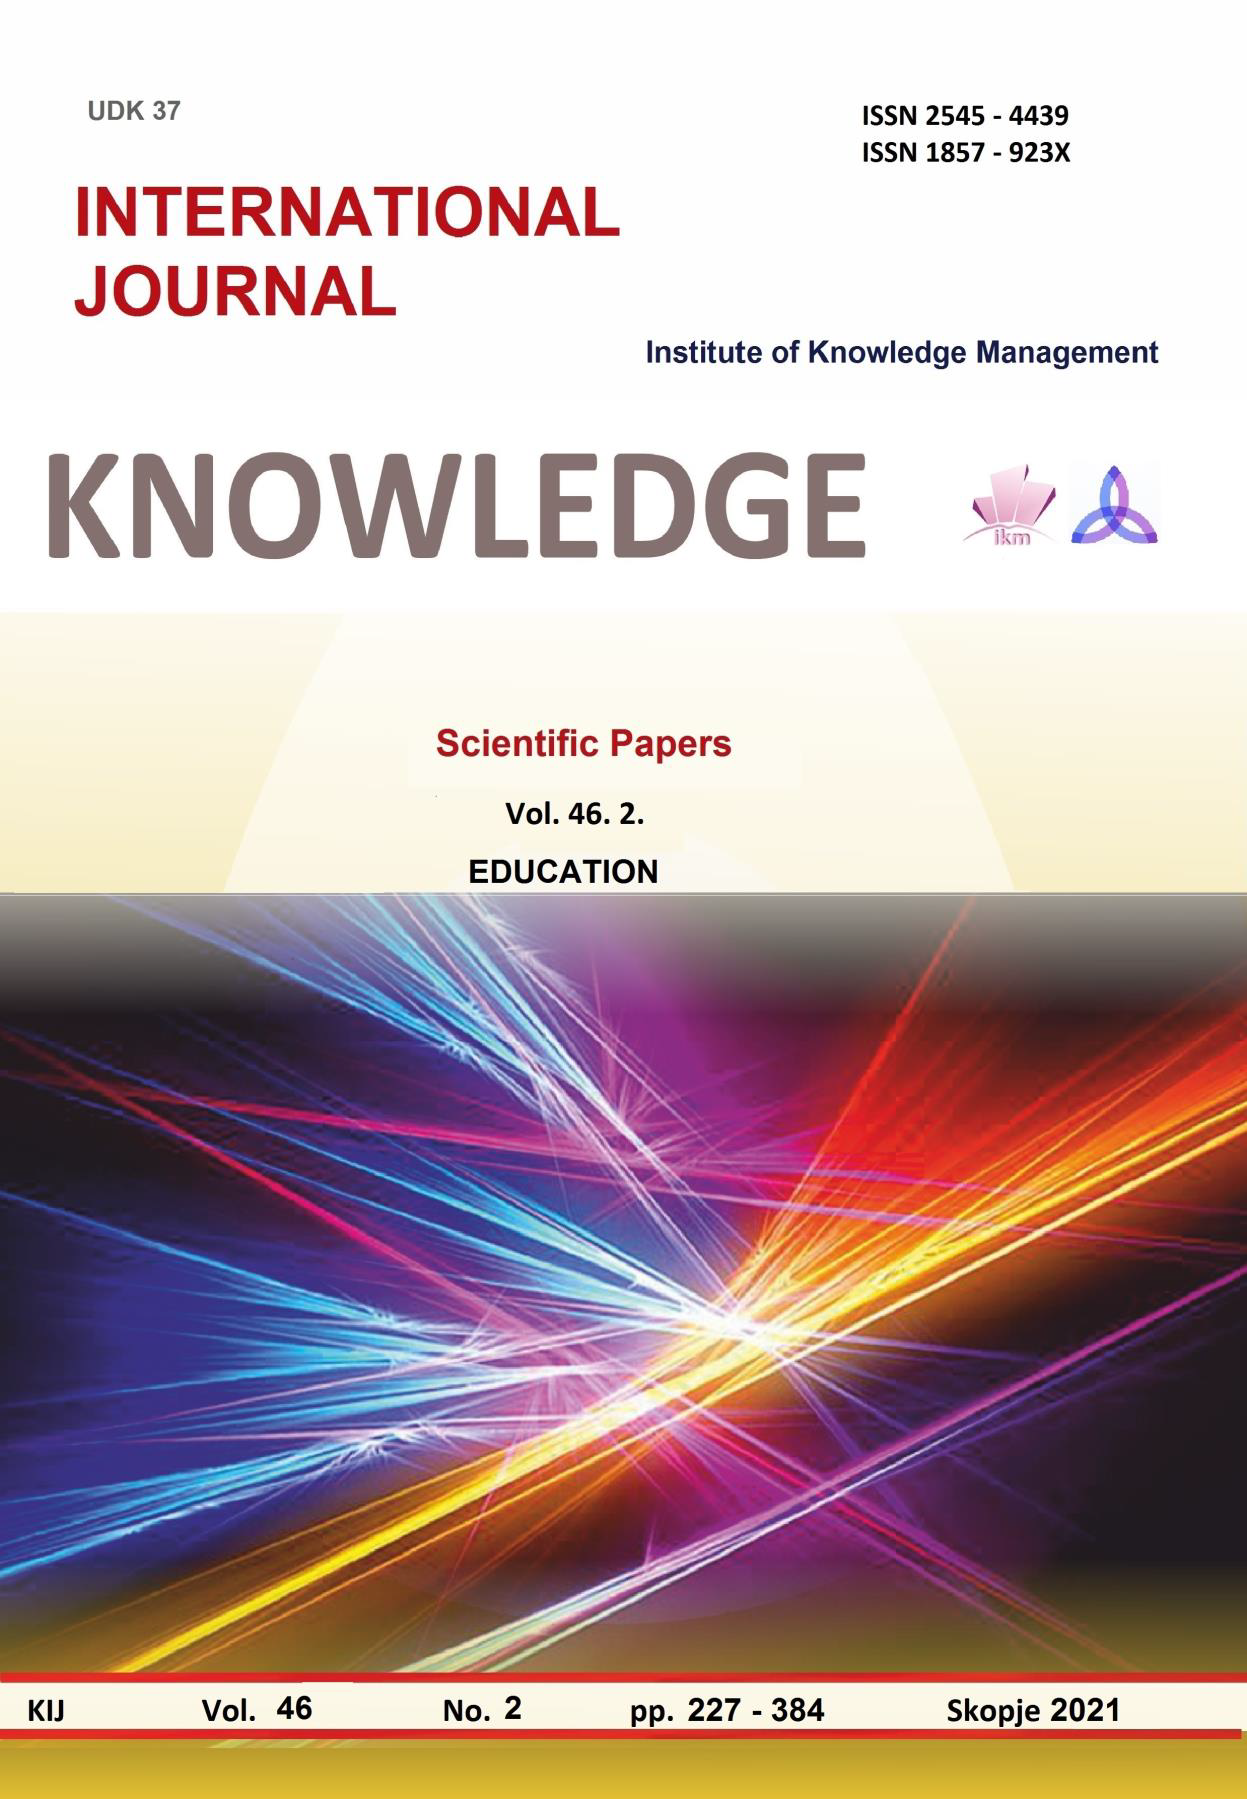 					View Vol. 29 No. 1 (2019): Knowledge - Capital of the future
				